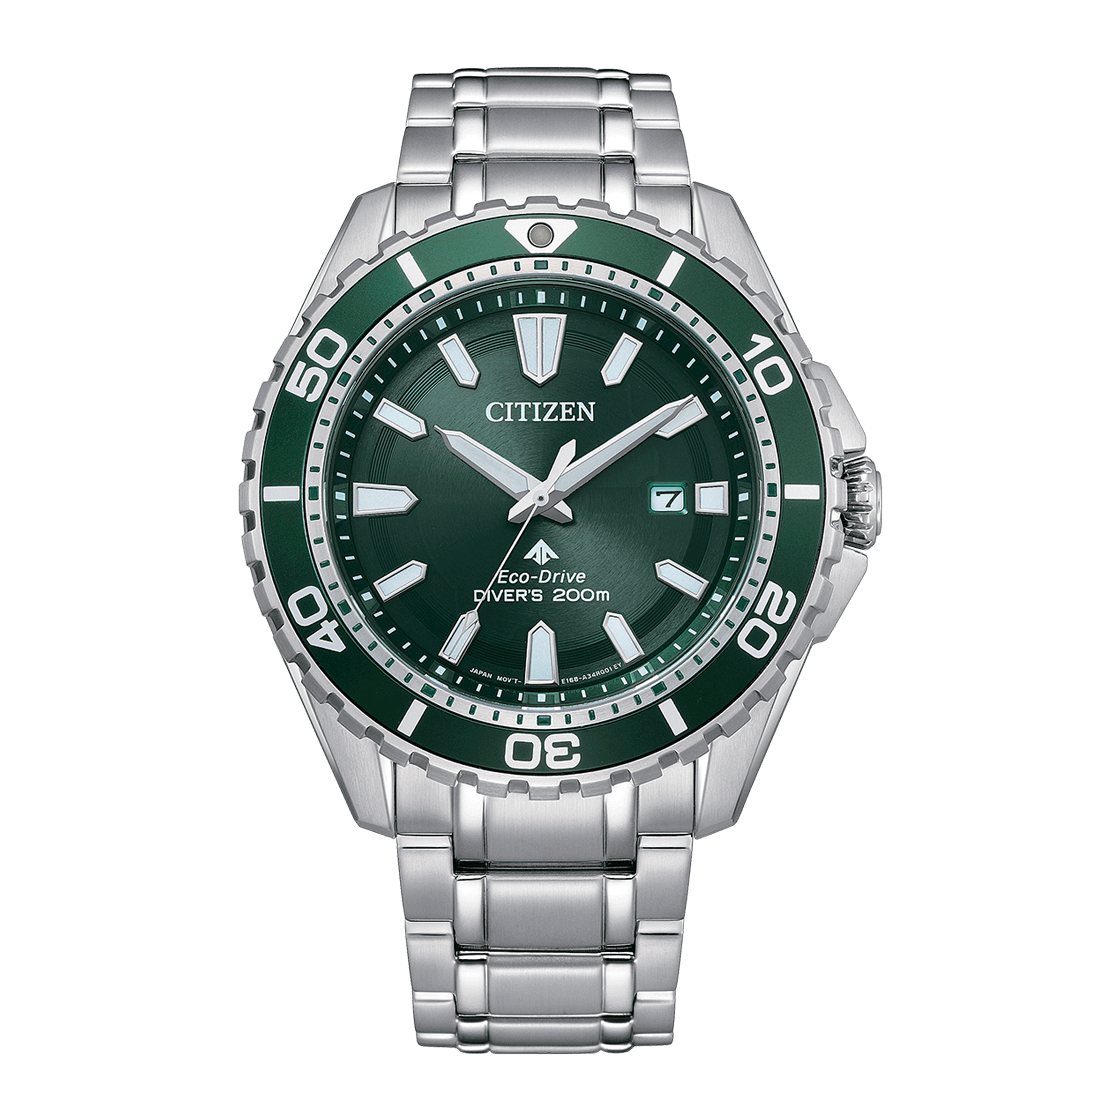 Citizen Eco-drive Promaster Dive BN0199-53X 44mm 200m WR stainless steel bracelet divers men’s watch Eco-drive movement 8solar or light powered)